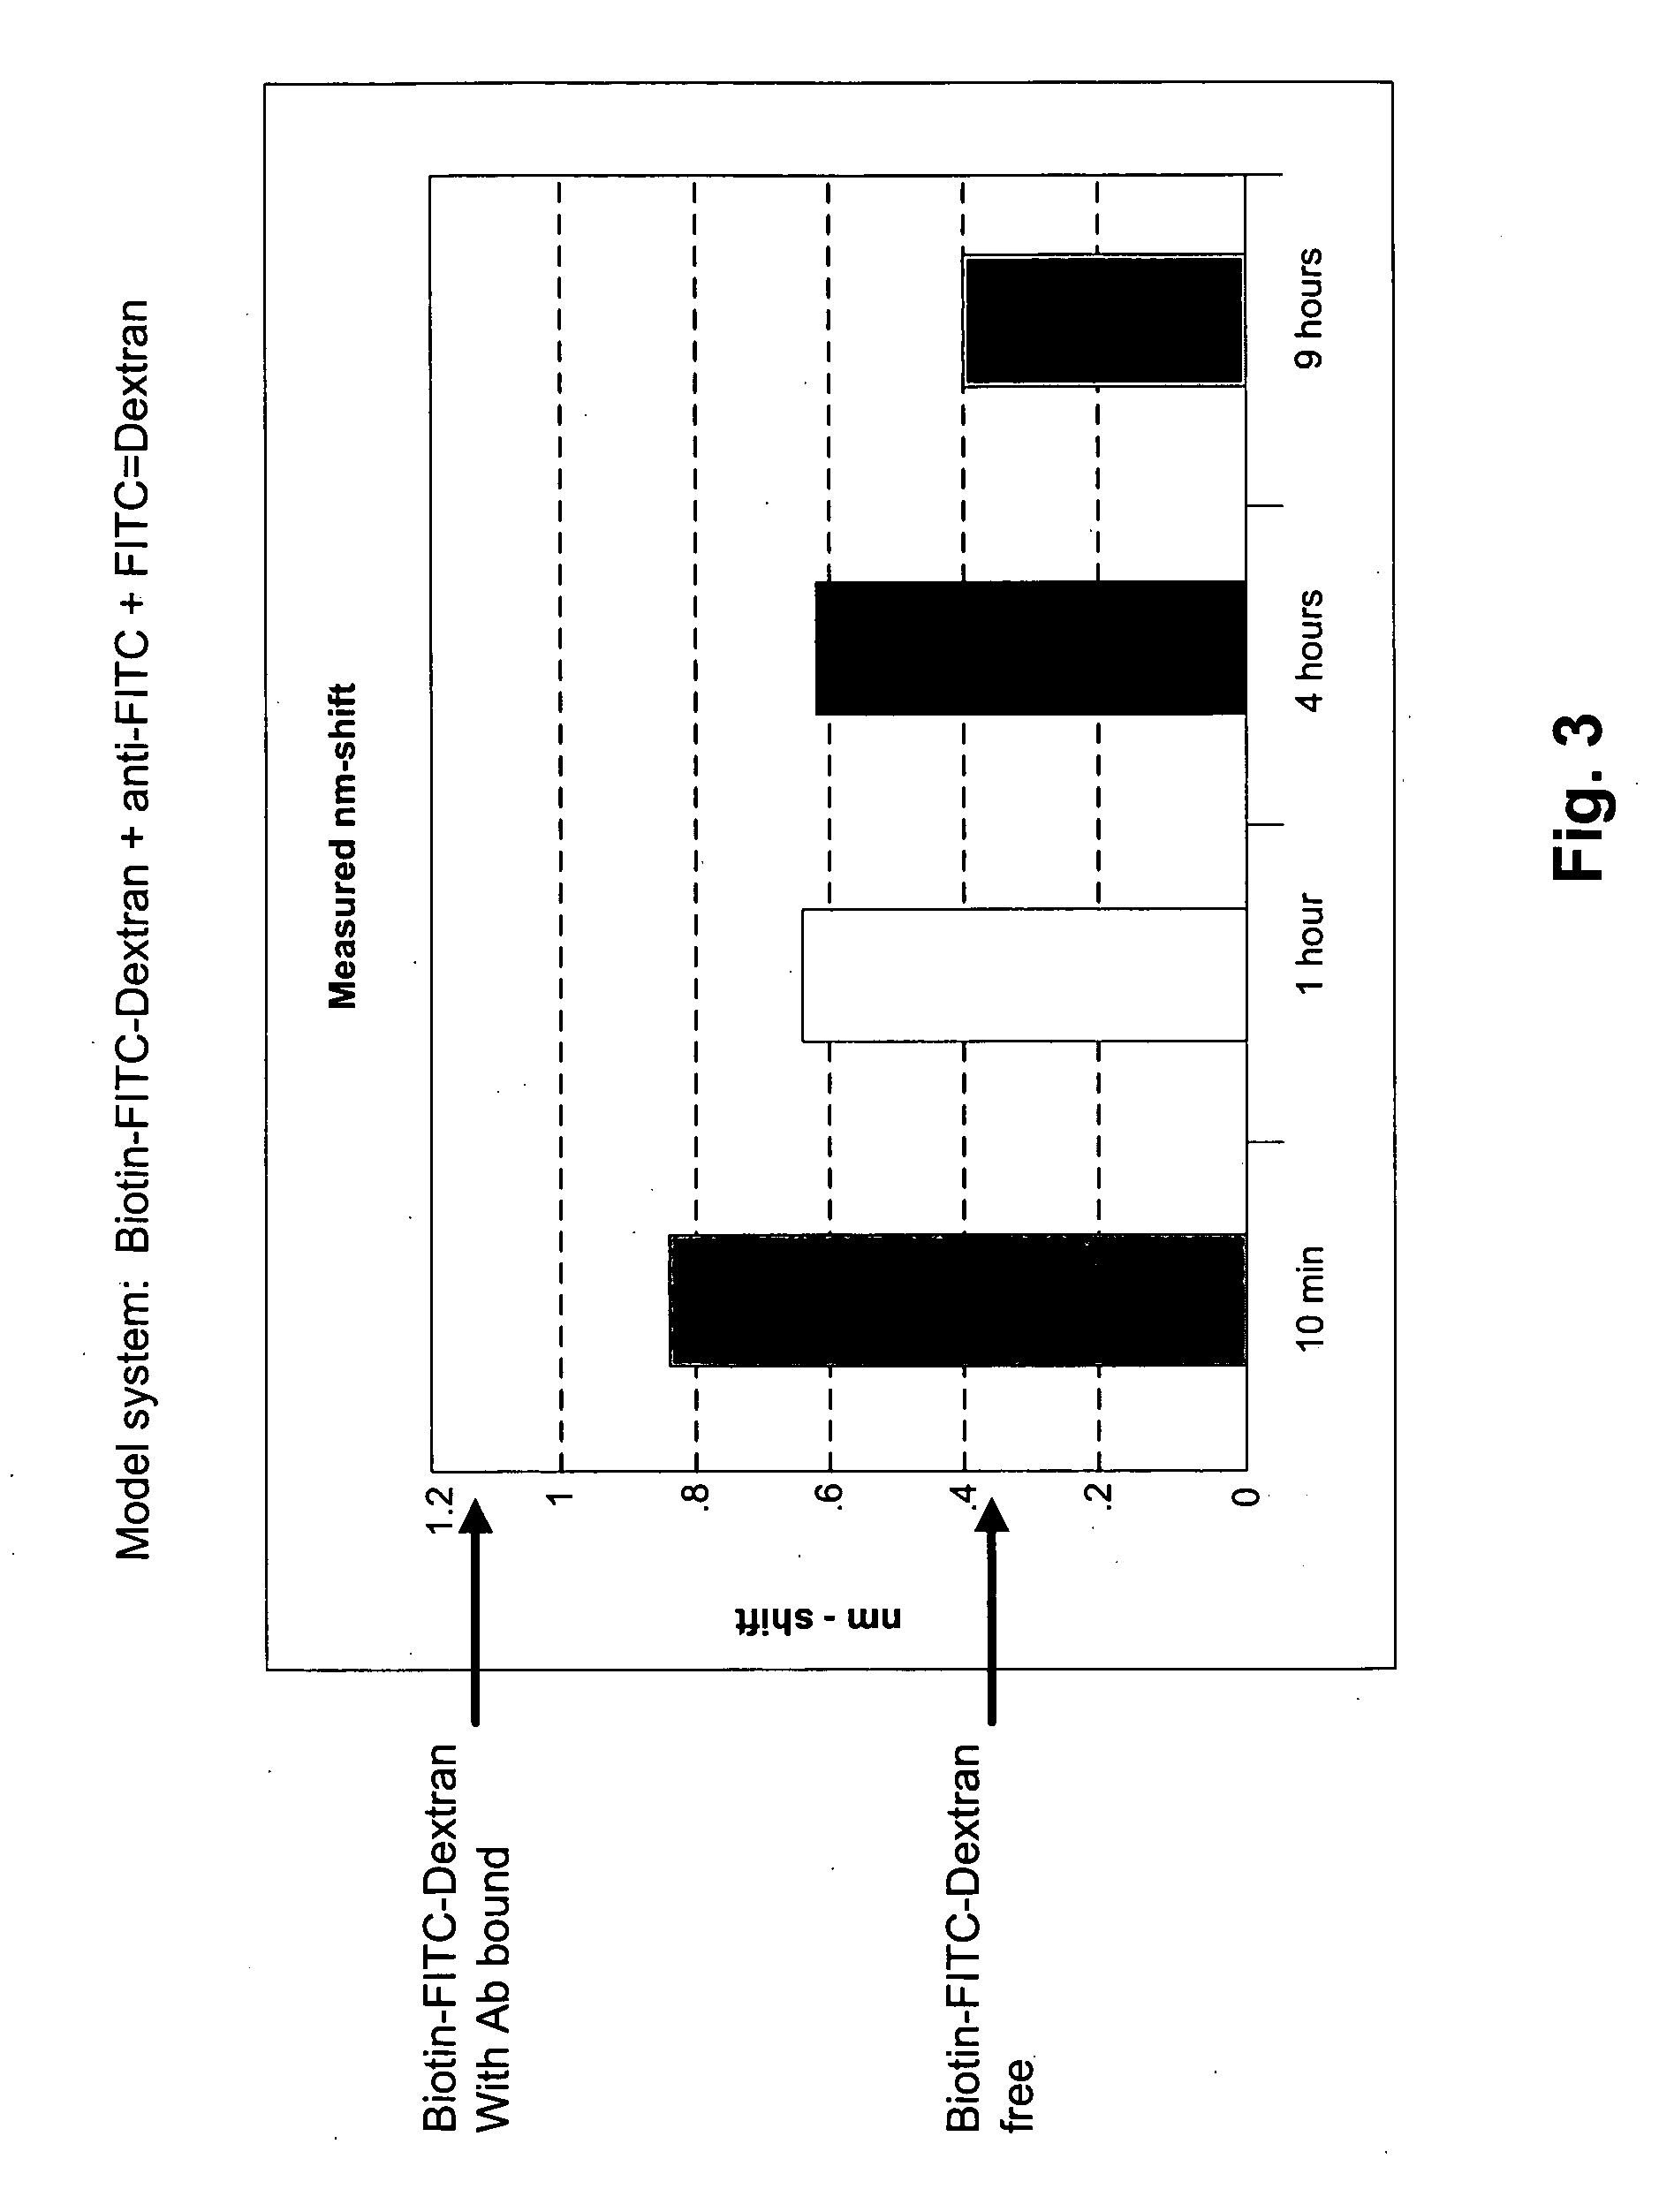 Methods for characterizing molecular interactions